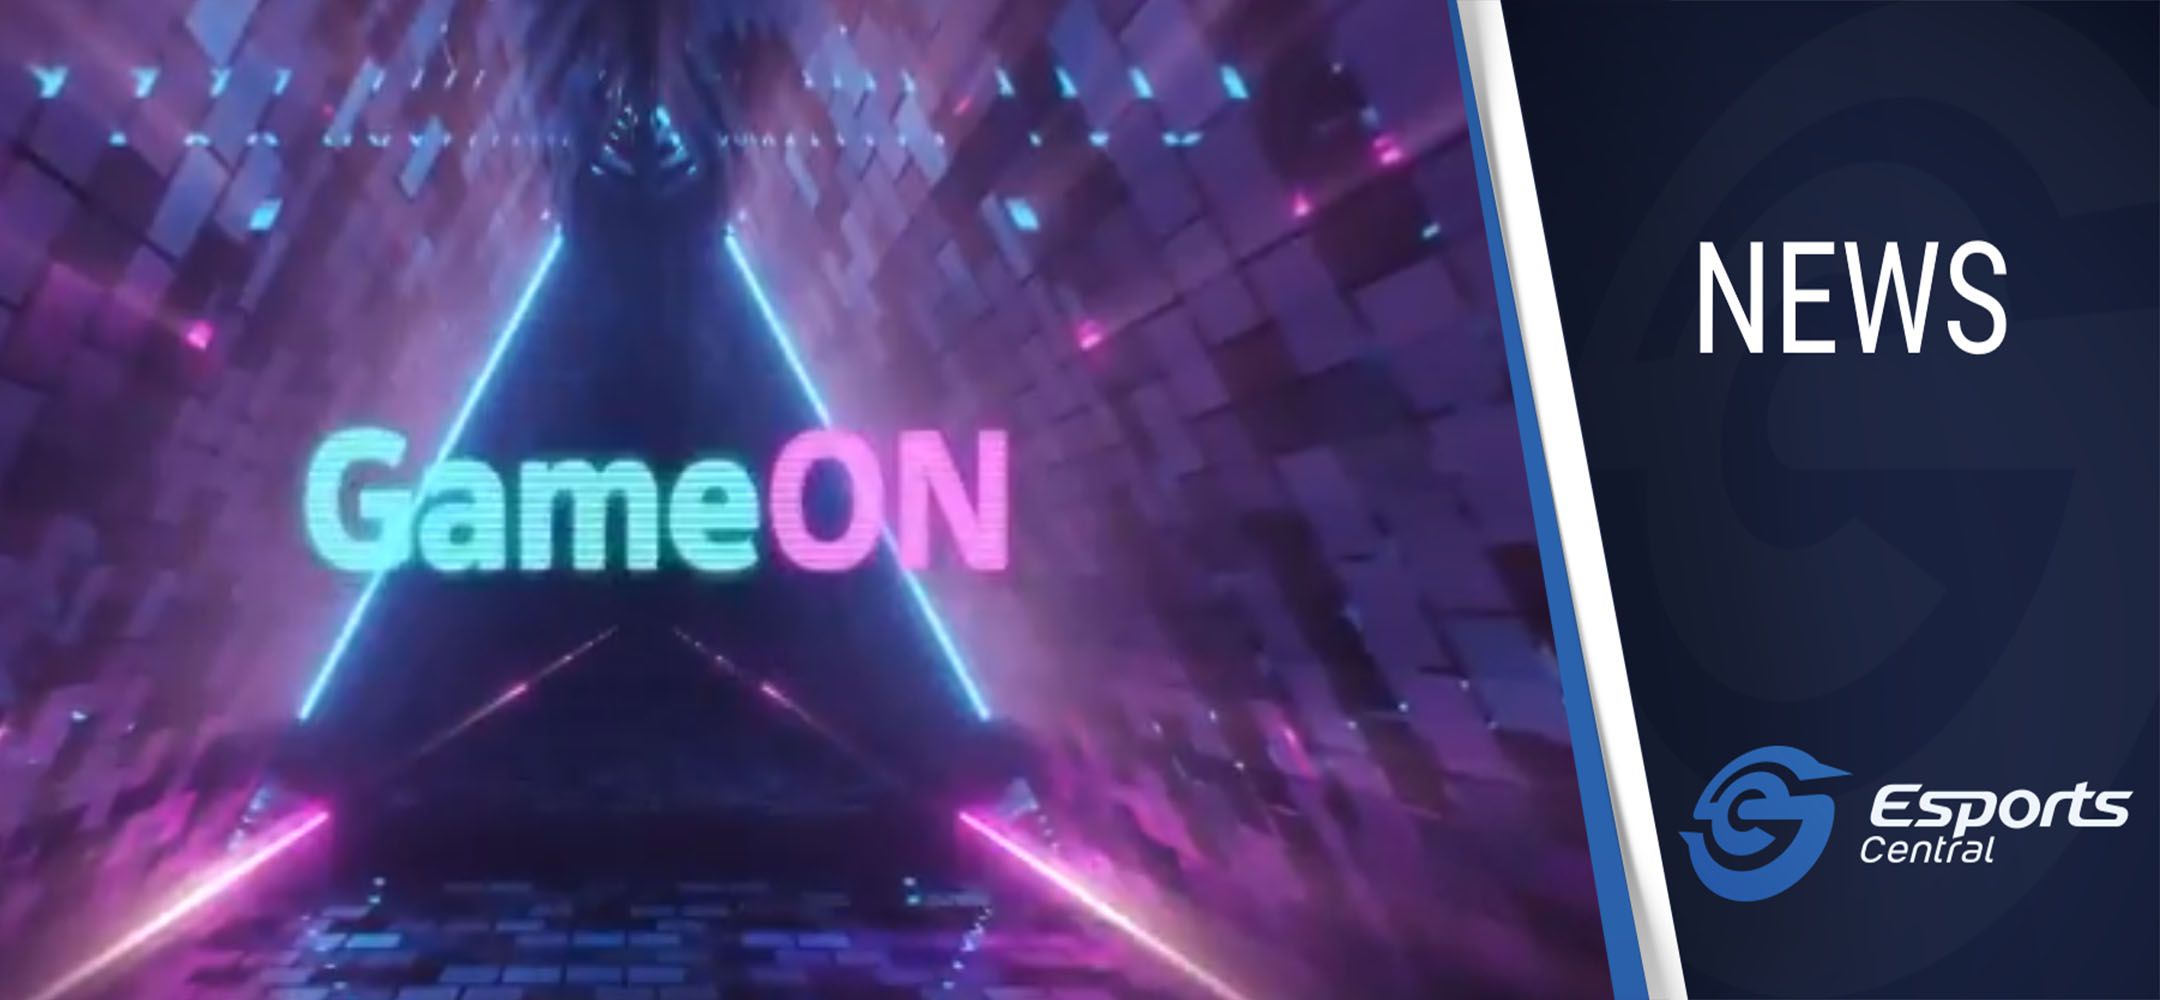 TelkomONE #OpenUpTheGames competition with three R100,000 contracts ...